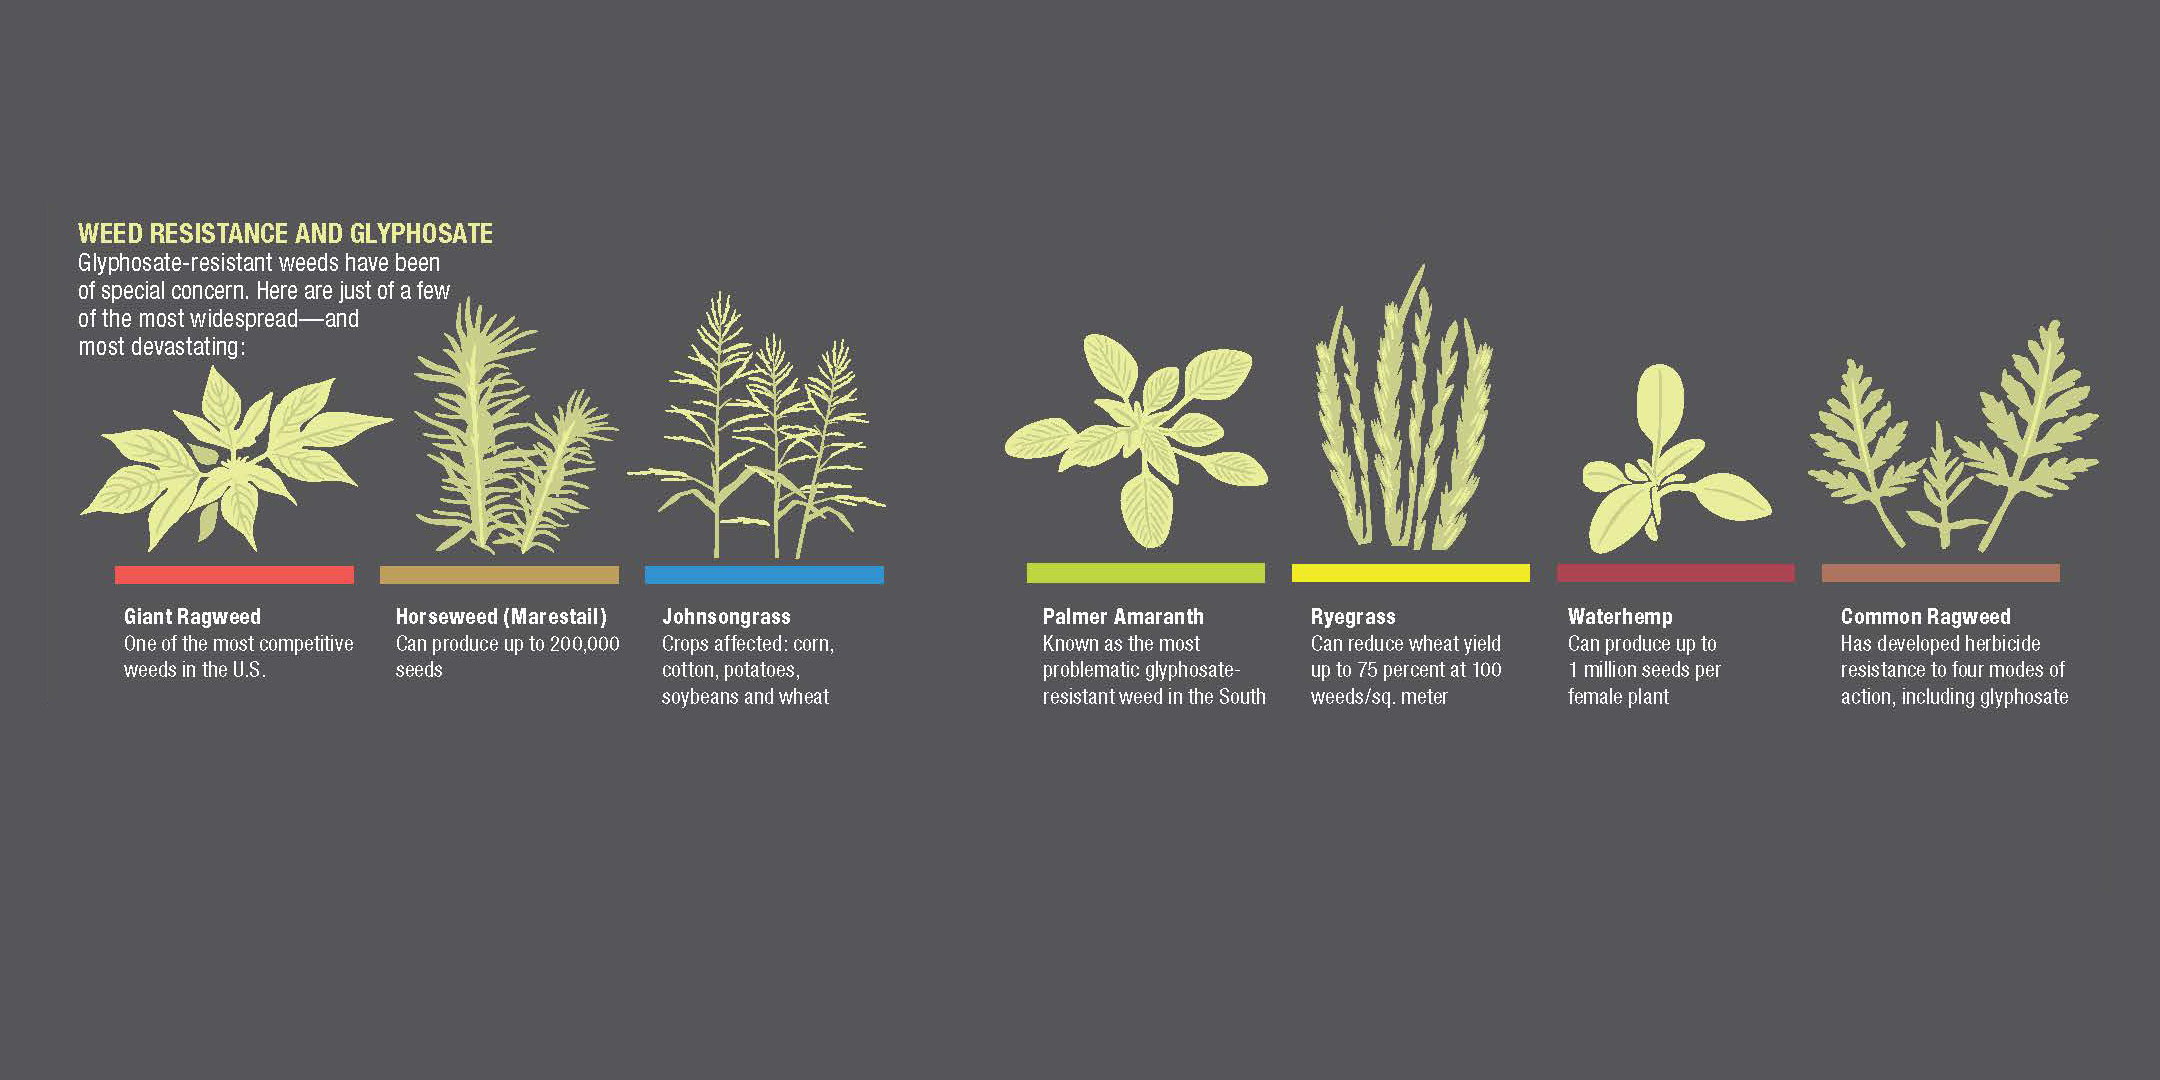 Weed Resistance and Glyphosate